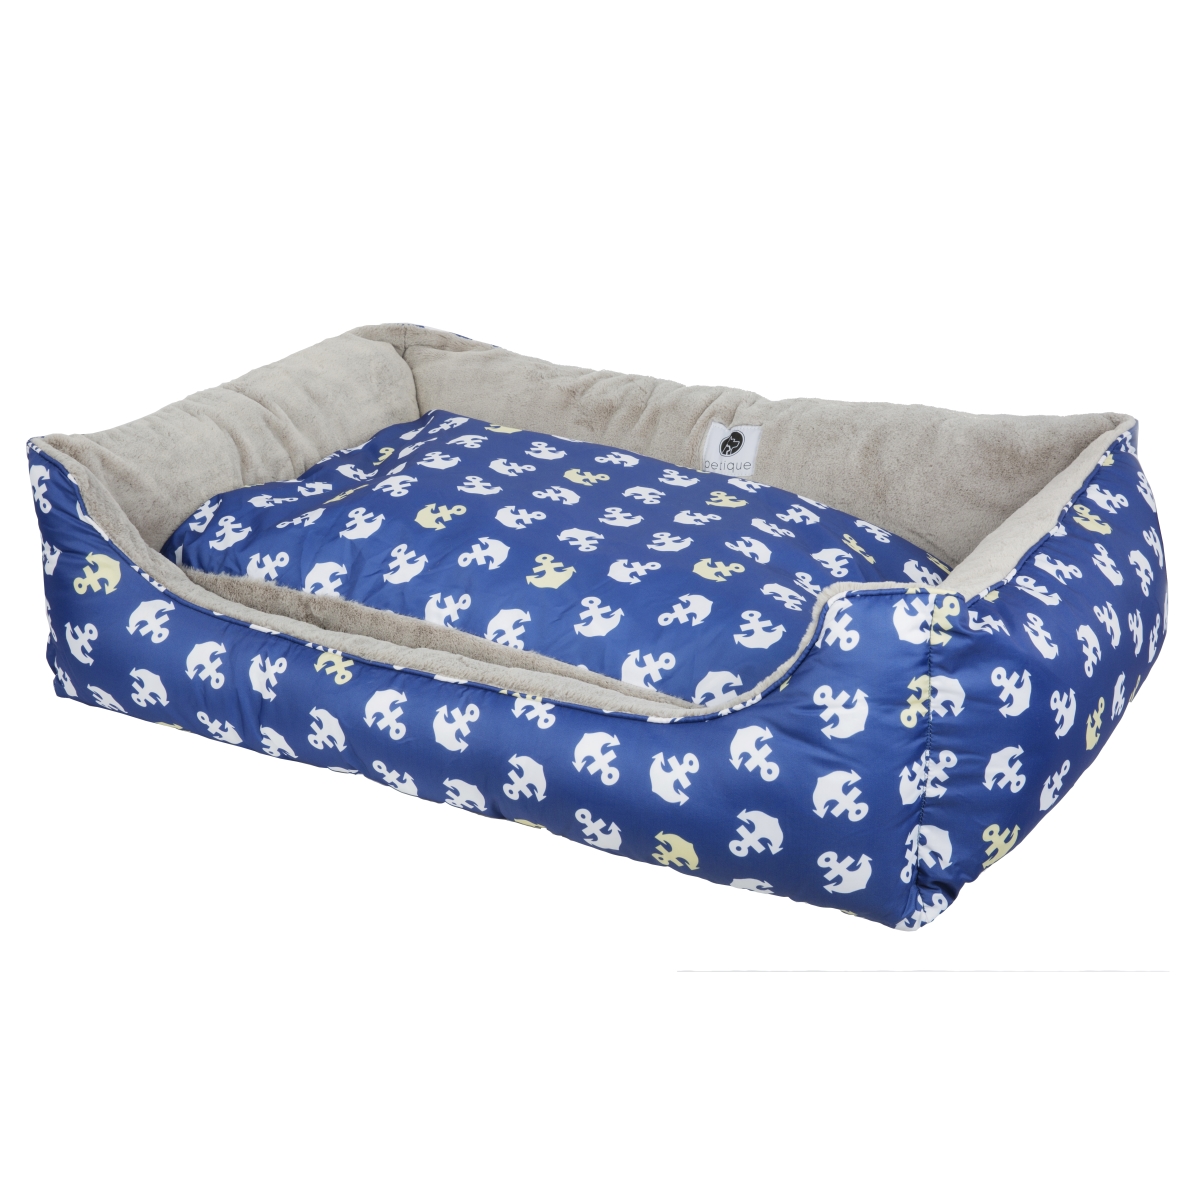 Anchors Away Reversible Pet Bed, Large & Extra Large